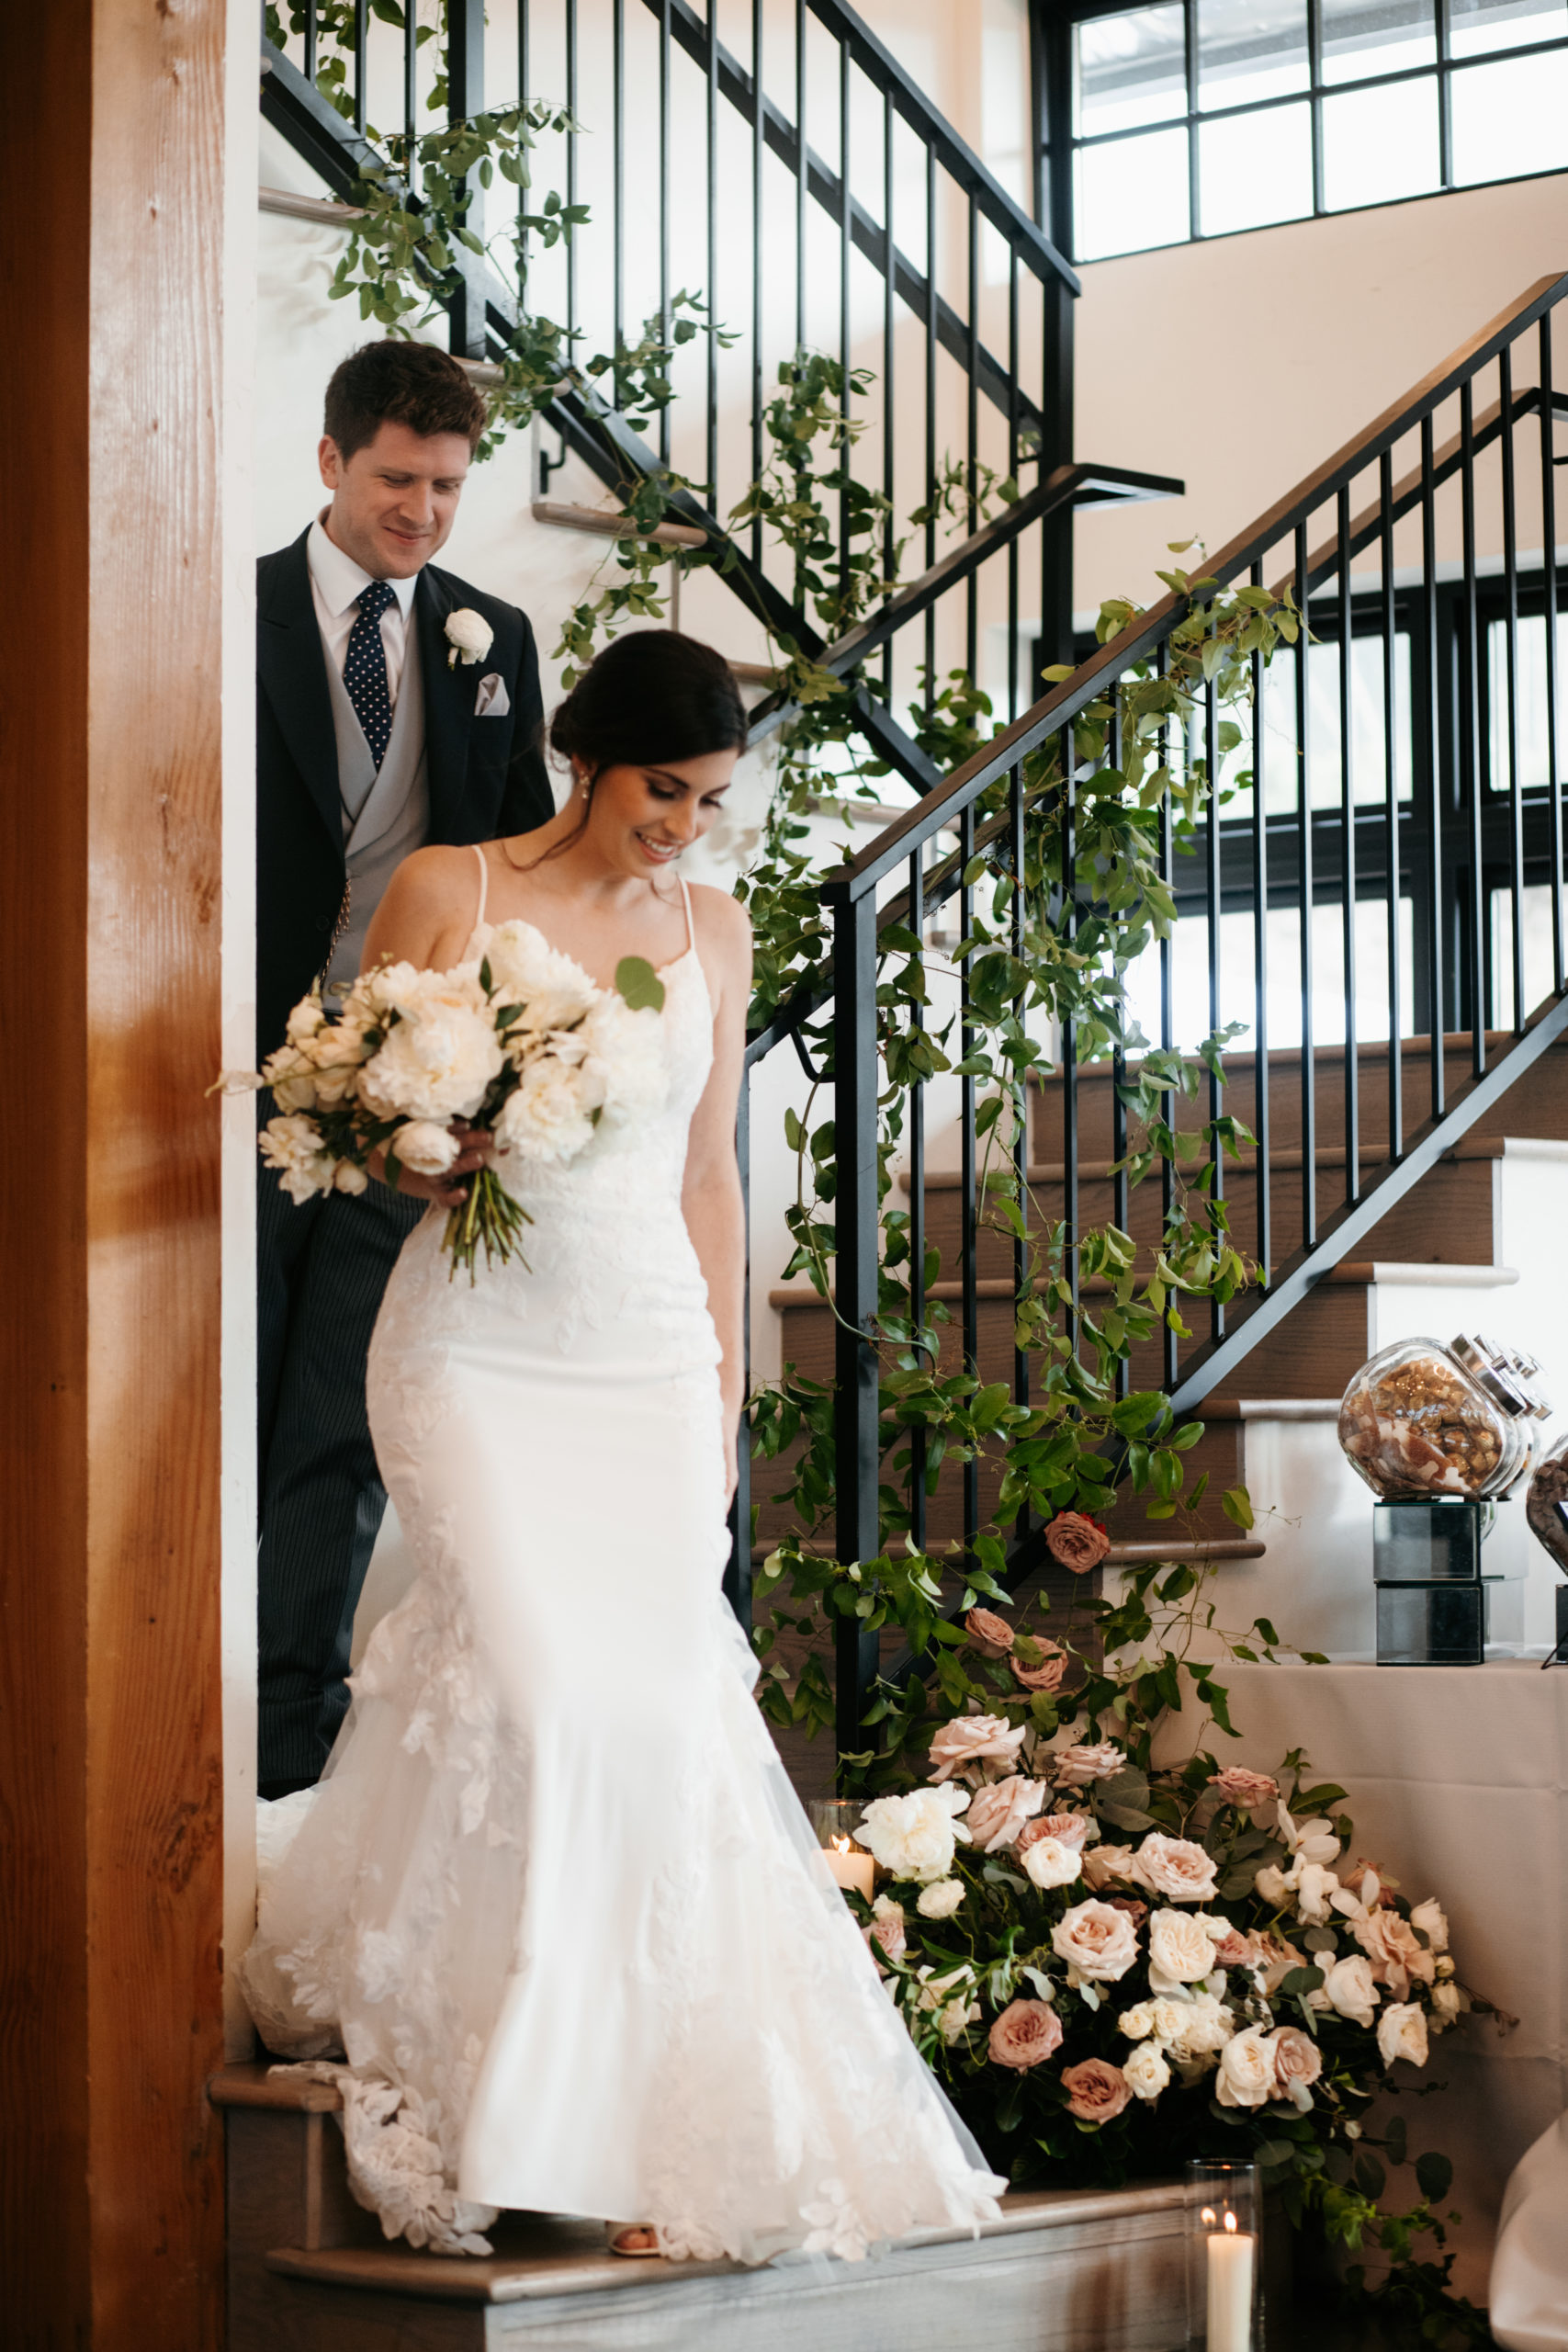 Bride and groom entering reception at North Star Gatherings | McArthur Weddings and Events